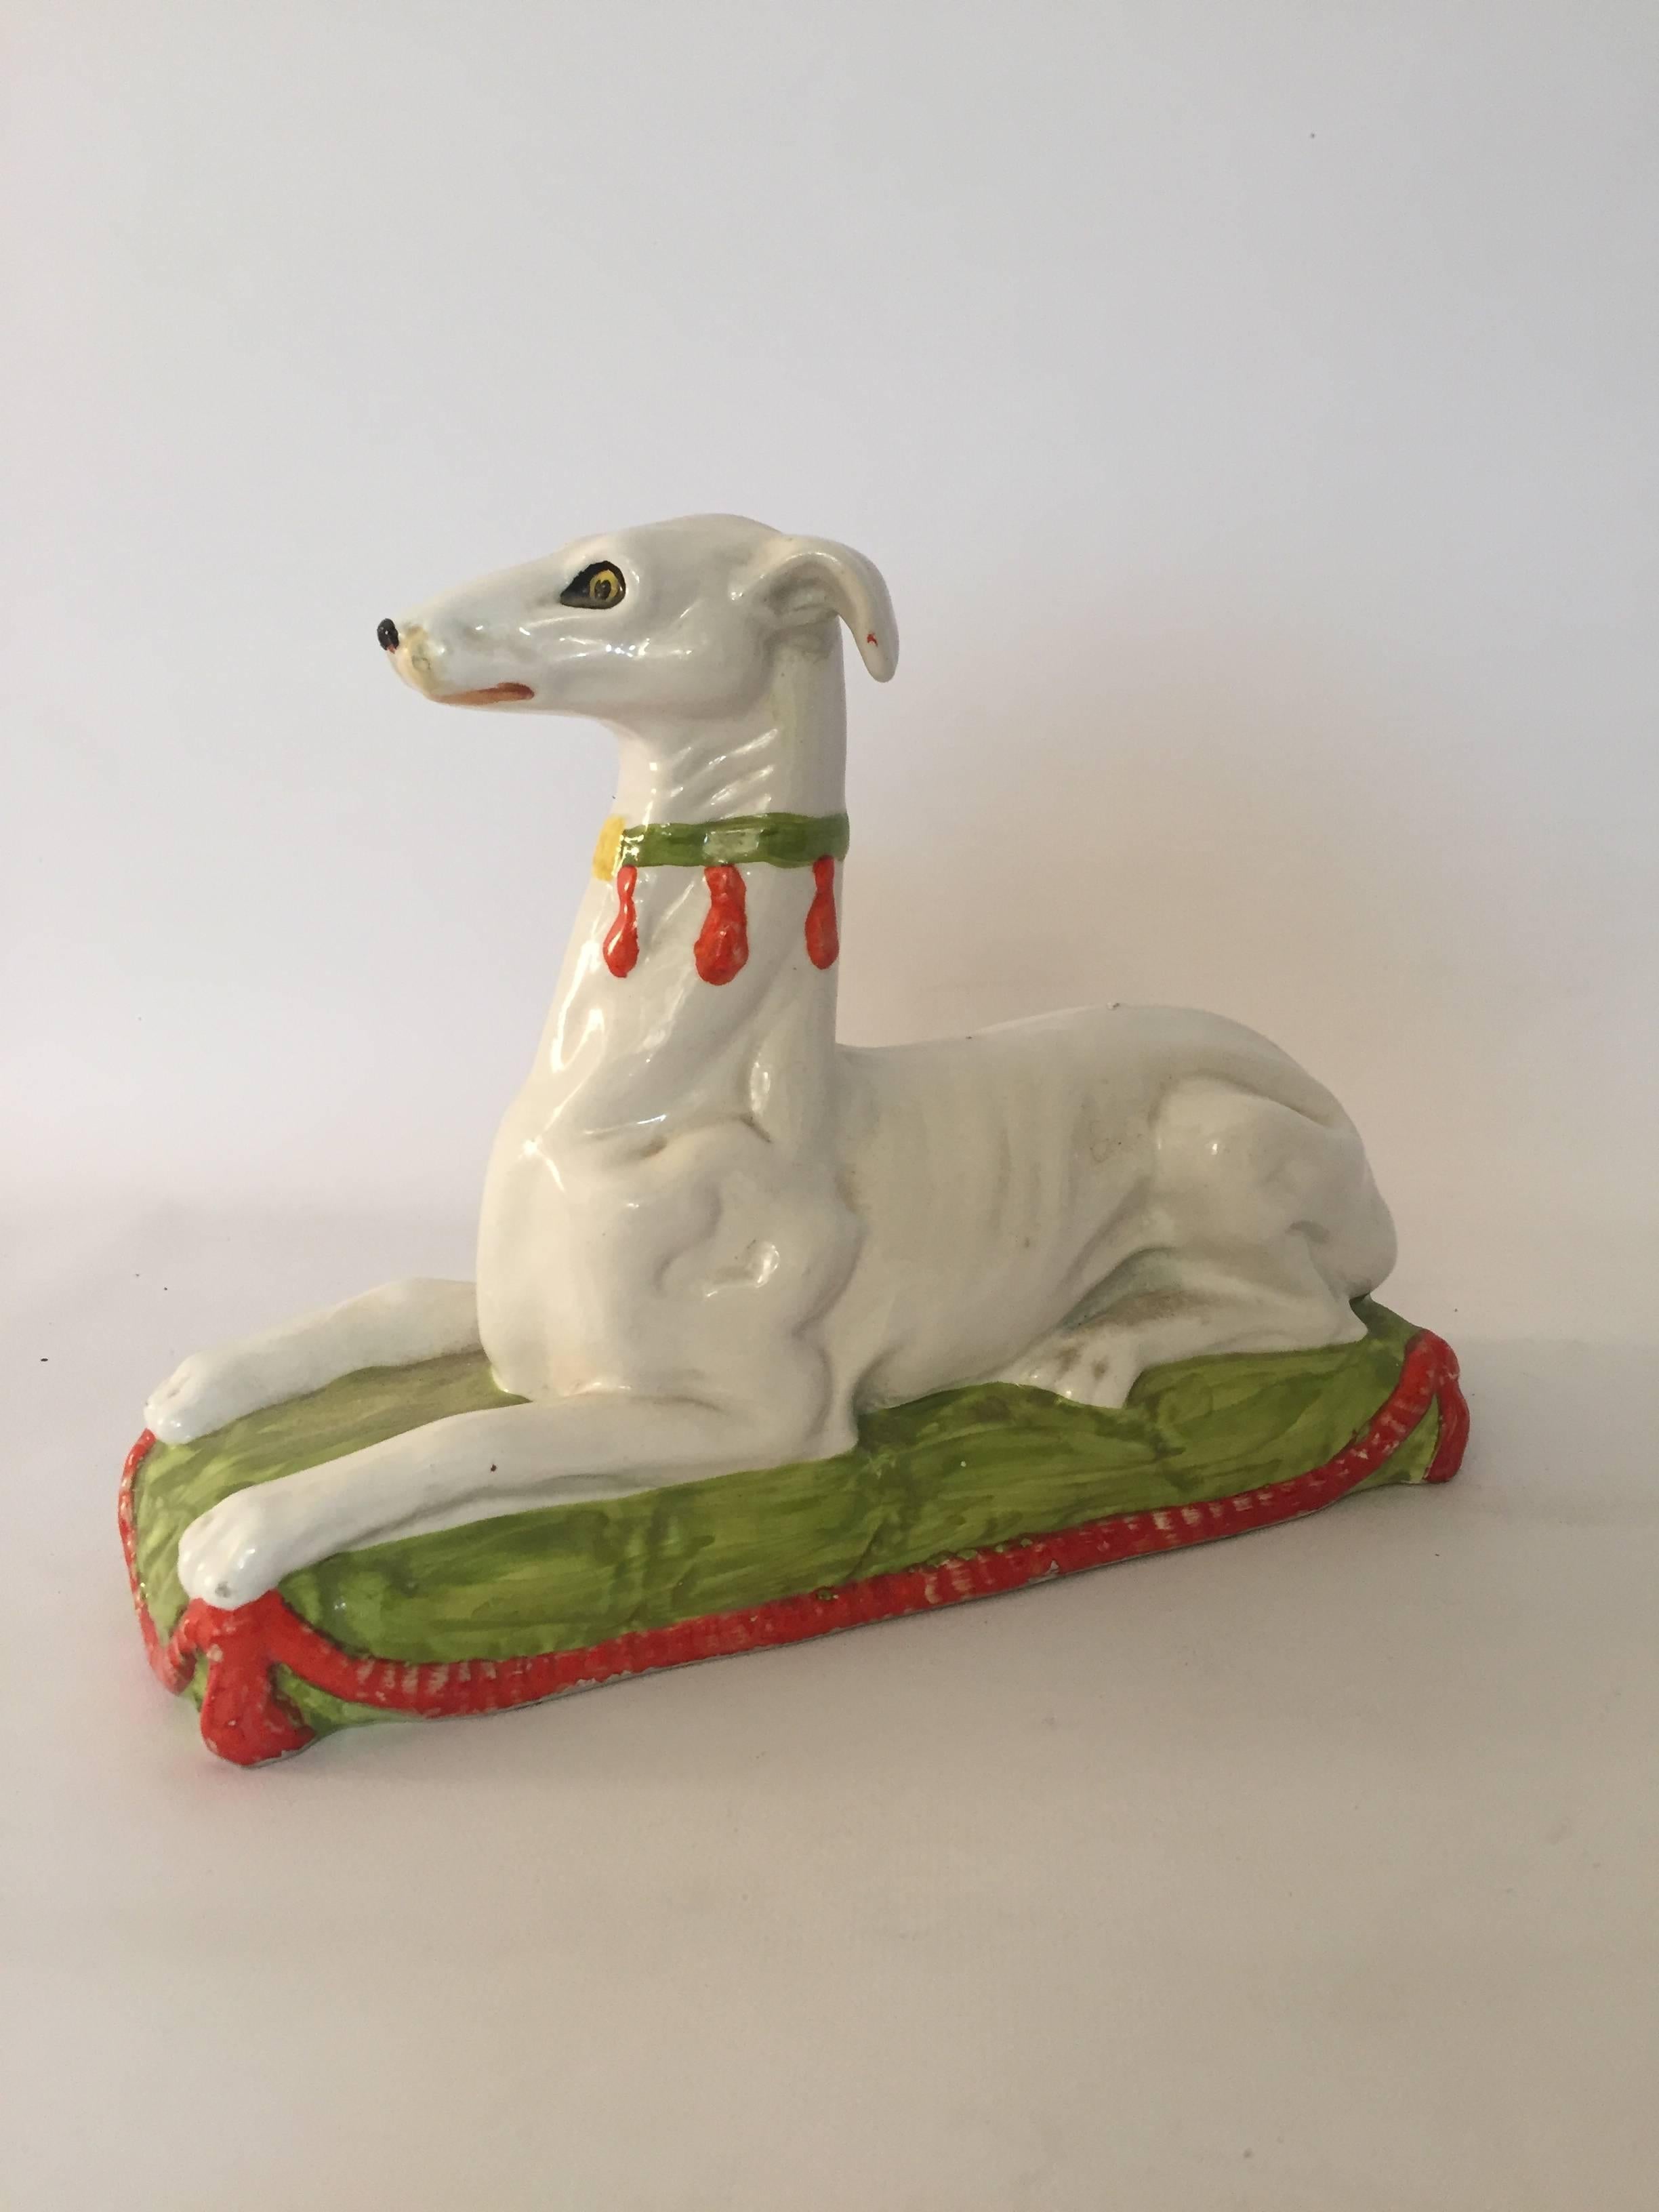 High glaze ceramic hand decorated Whippet, circa 1960. Probably Italian in origin, but not signed or marked on the bottom. This austere dog is perched resting on a green pillow base with red swagger tassels. Very good, original condition with some